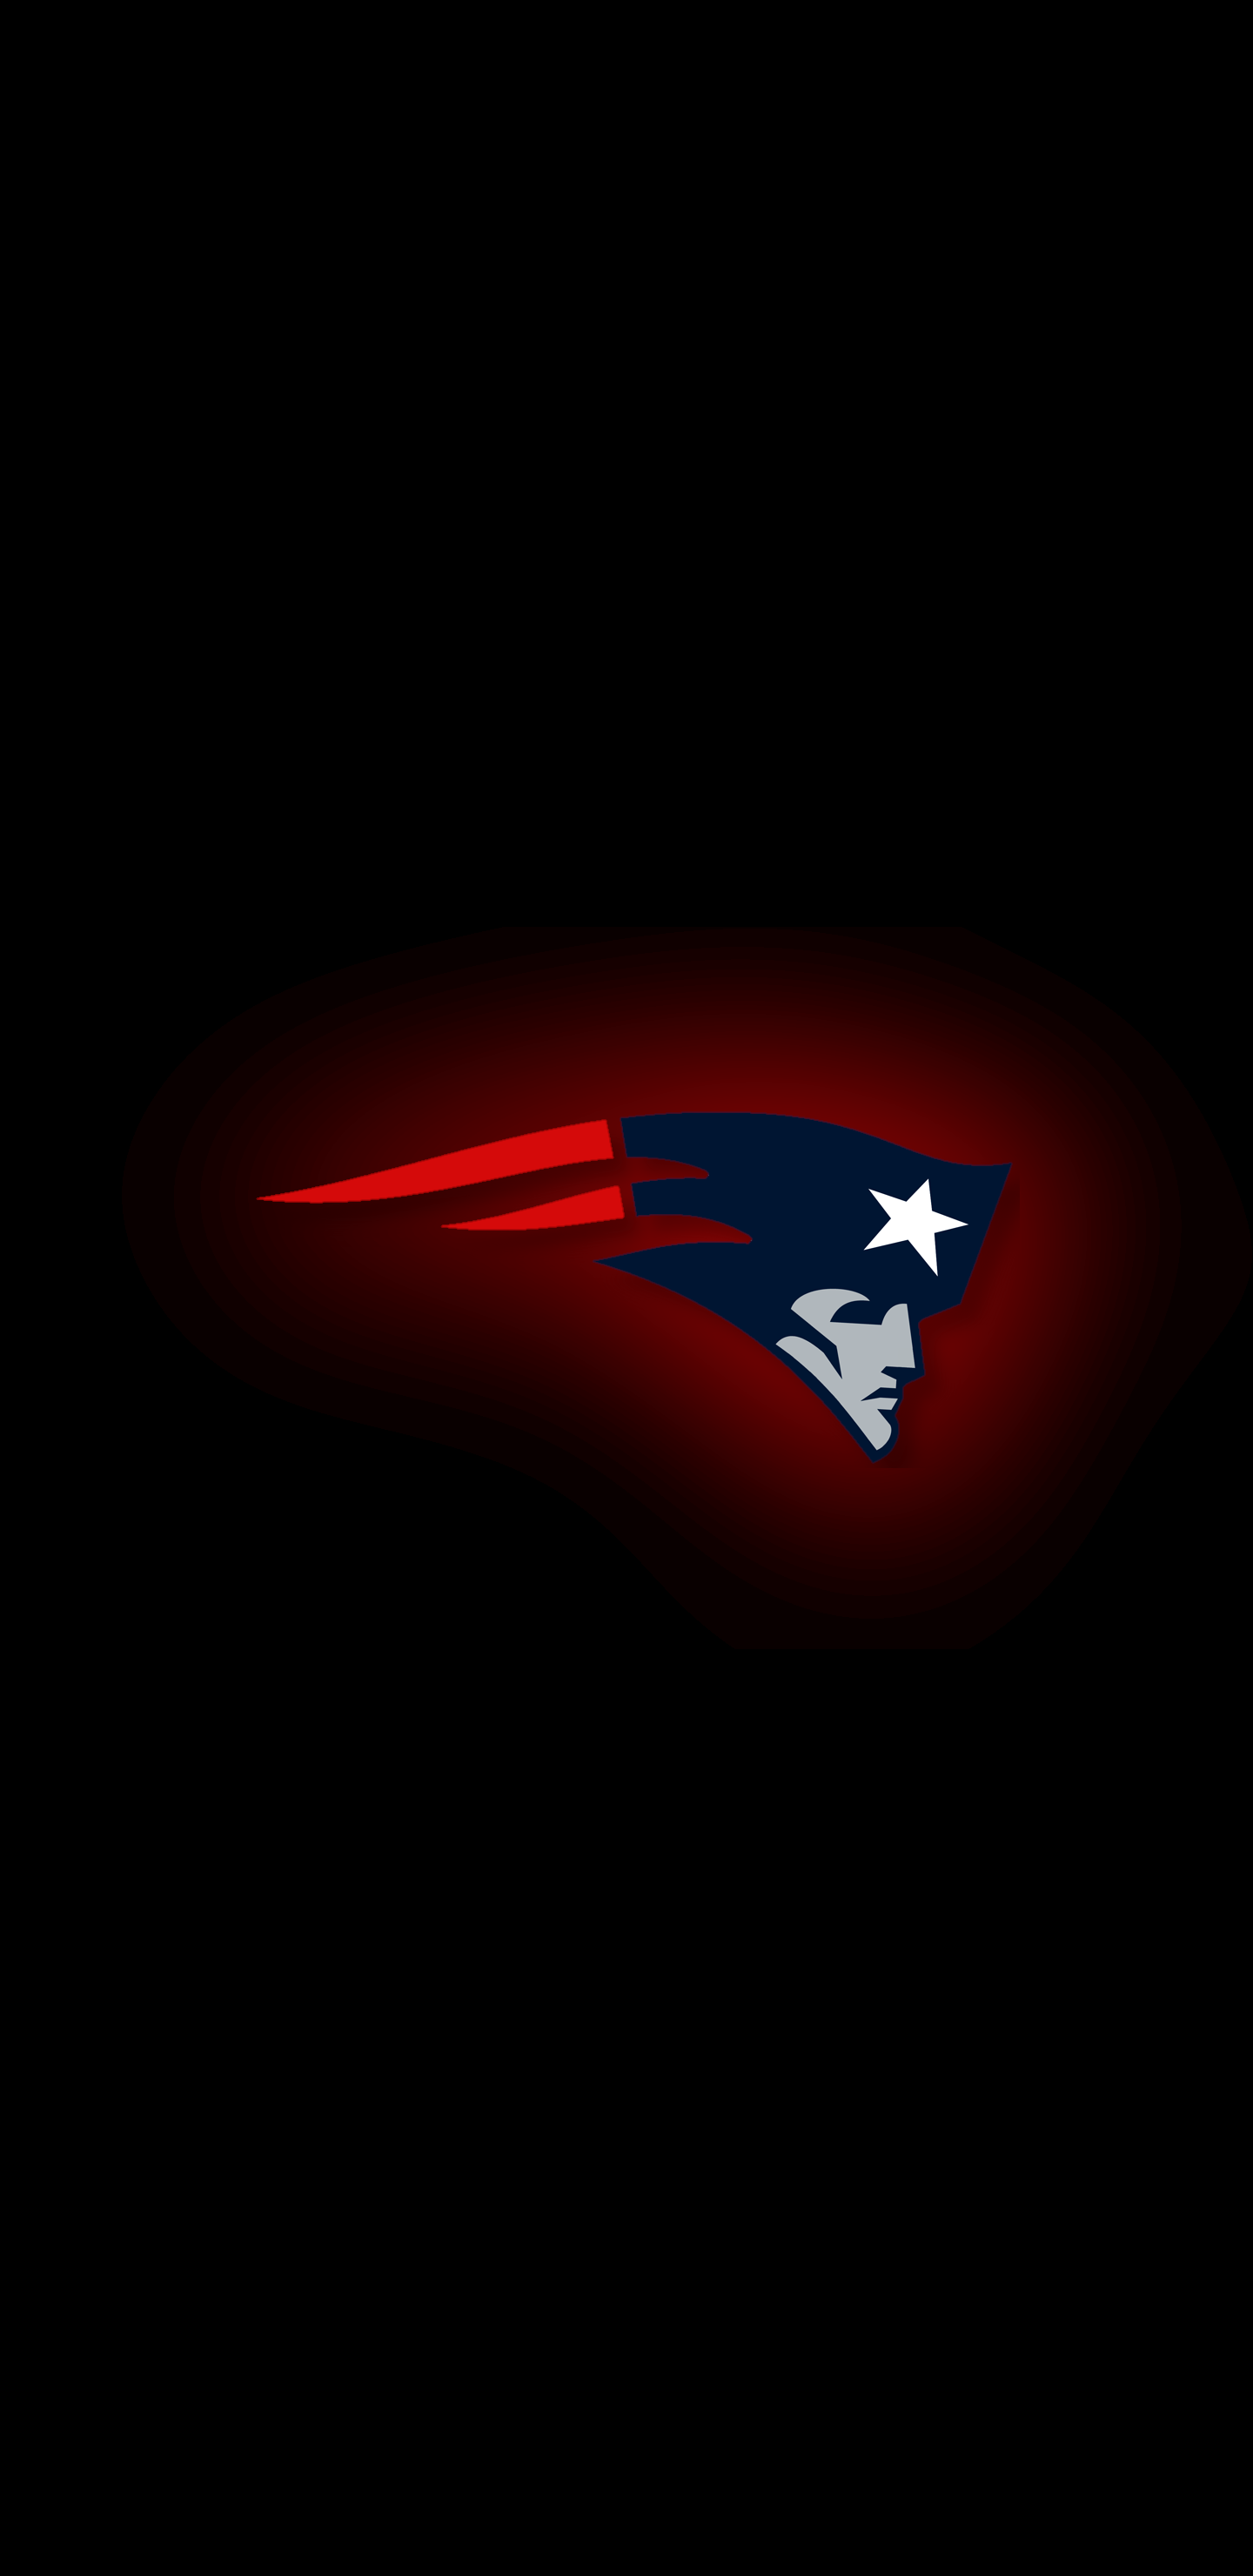 I'm making and amoled wallpaper for every NFL team! 9 down, Patriots. New england patriots wallpaper, Patriots